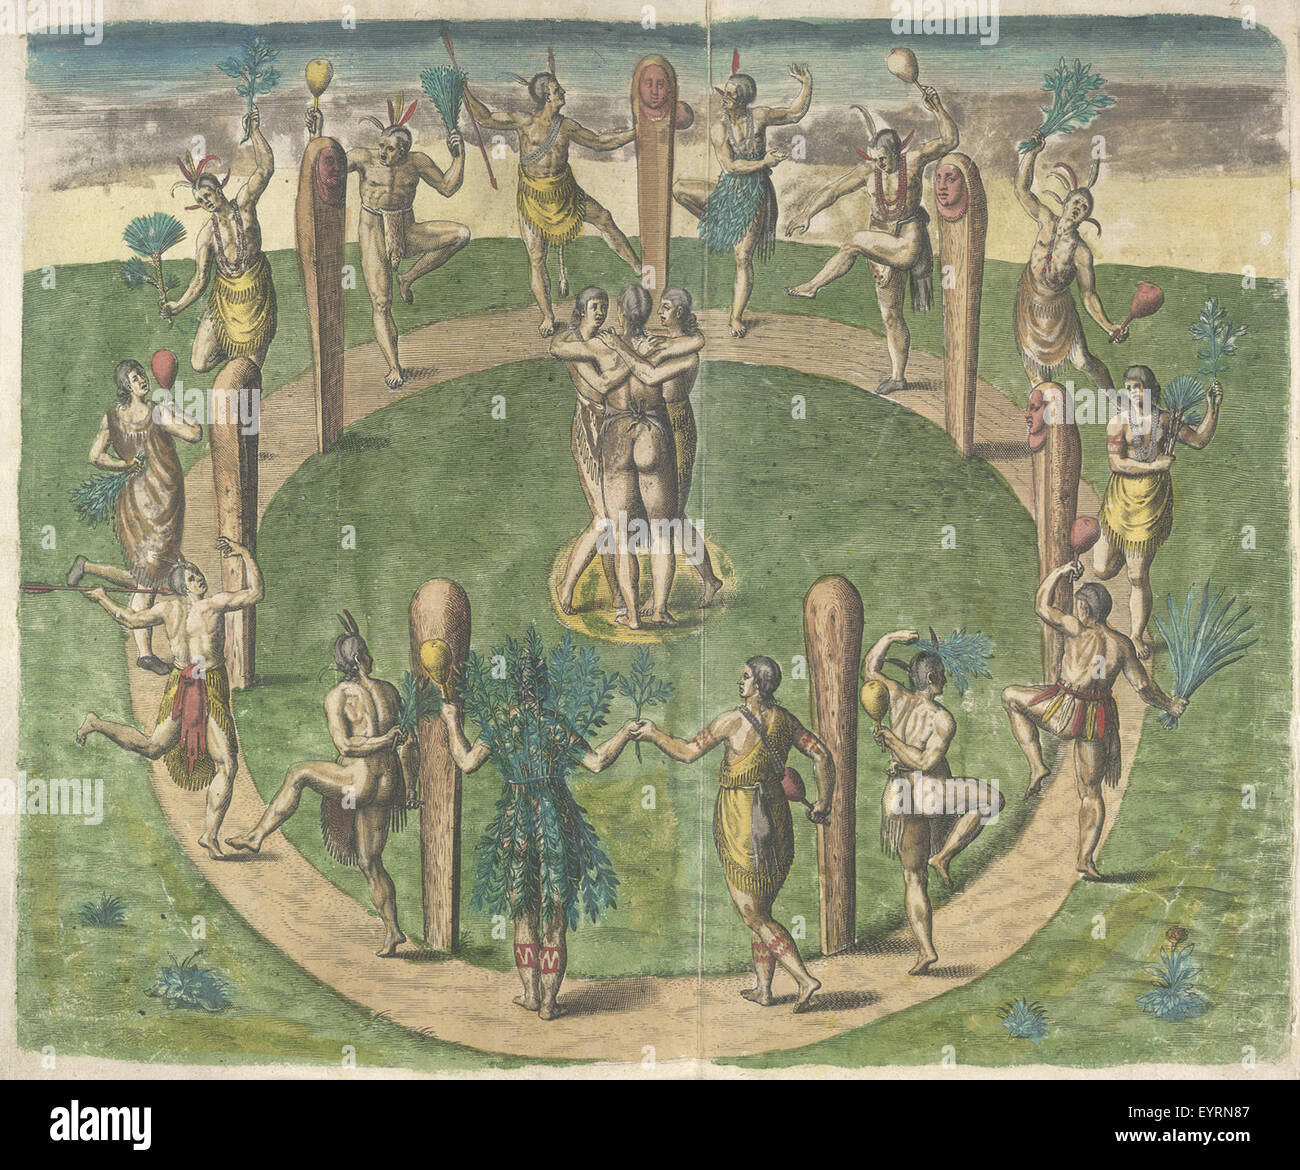 Travels through Virginia. [From Theodor de Bry's 'America', Vol. I, 1590, after a drawing of John White]. - caption: ''The Virginian's manner of dancing at their religious festivals'. Engraving of a group Native Indians dancing round a circle of wooden po Travels through Virginia [From Theodor de Bry's 'America', Vol I, Stock Photo